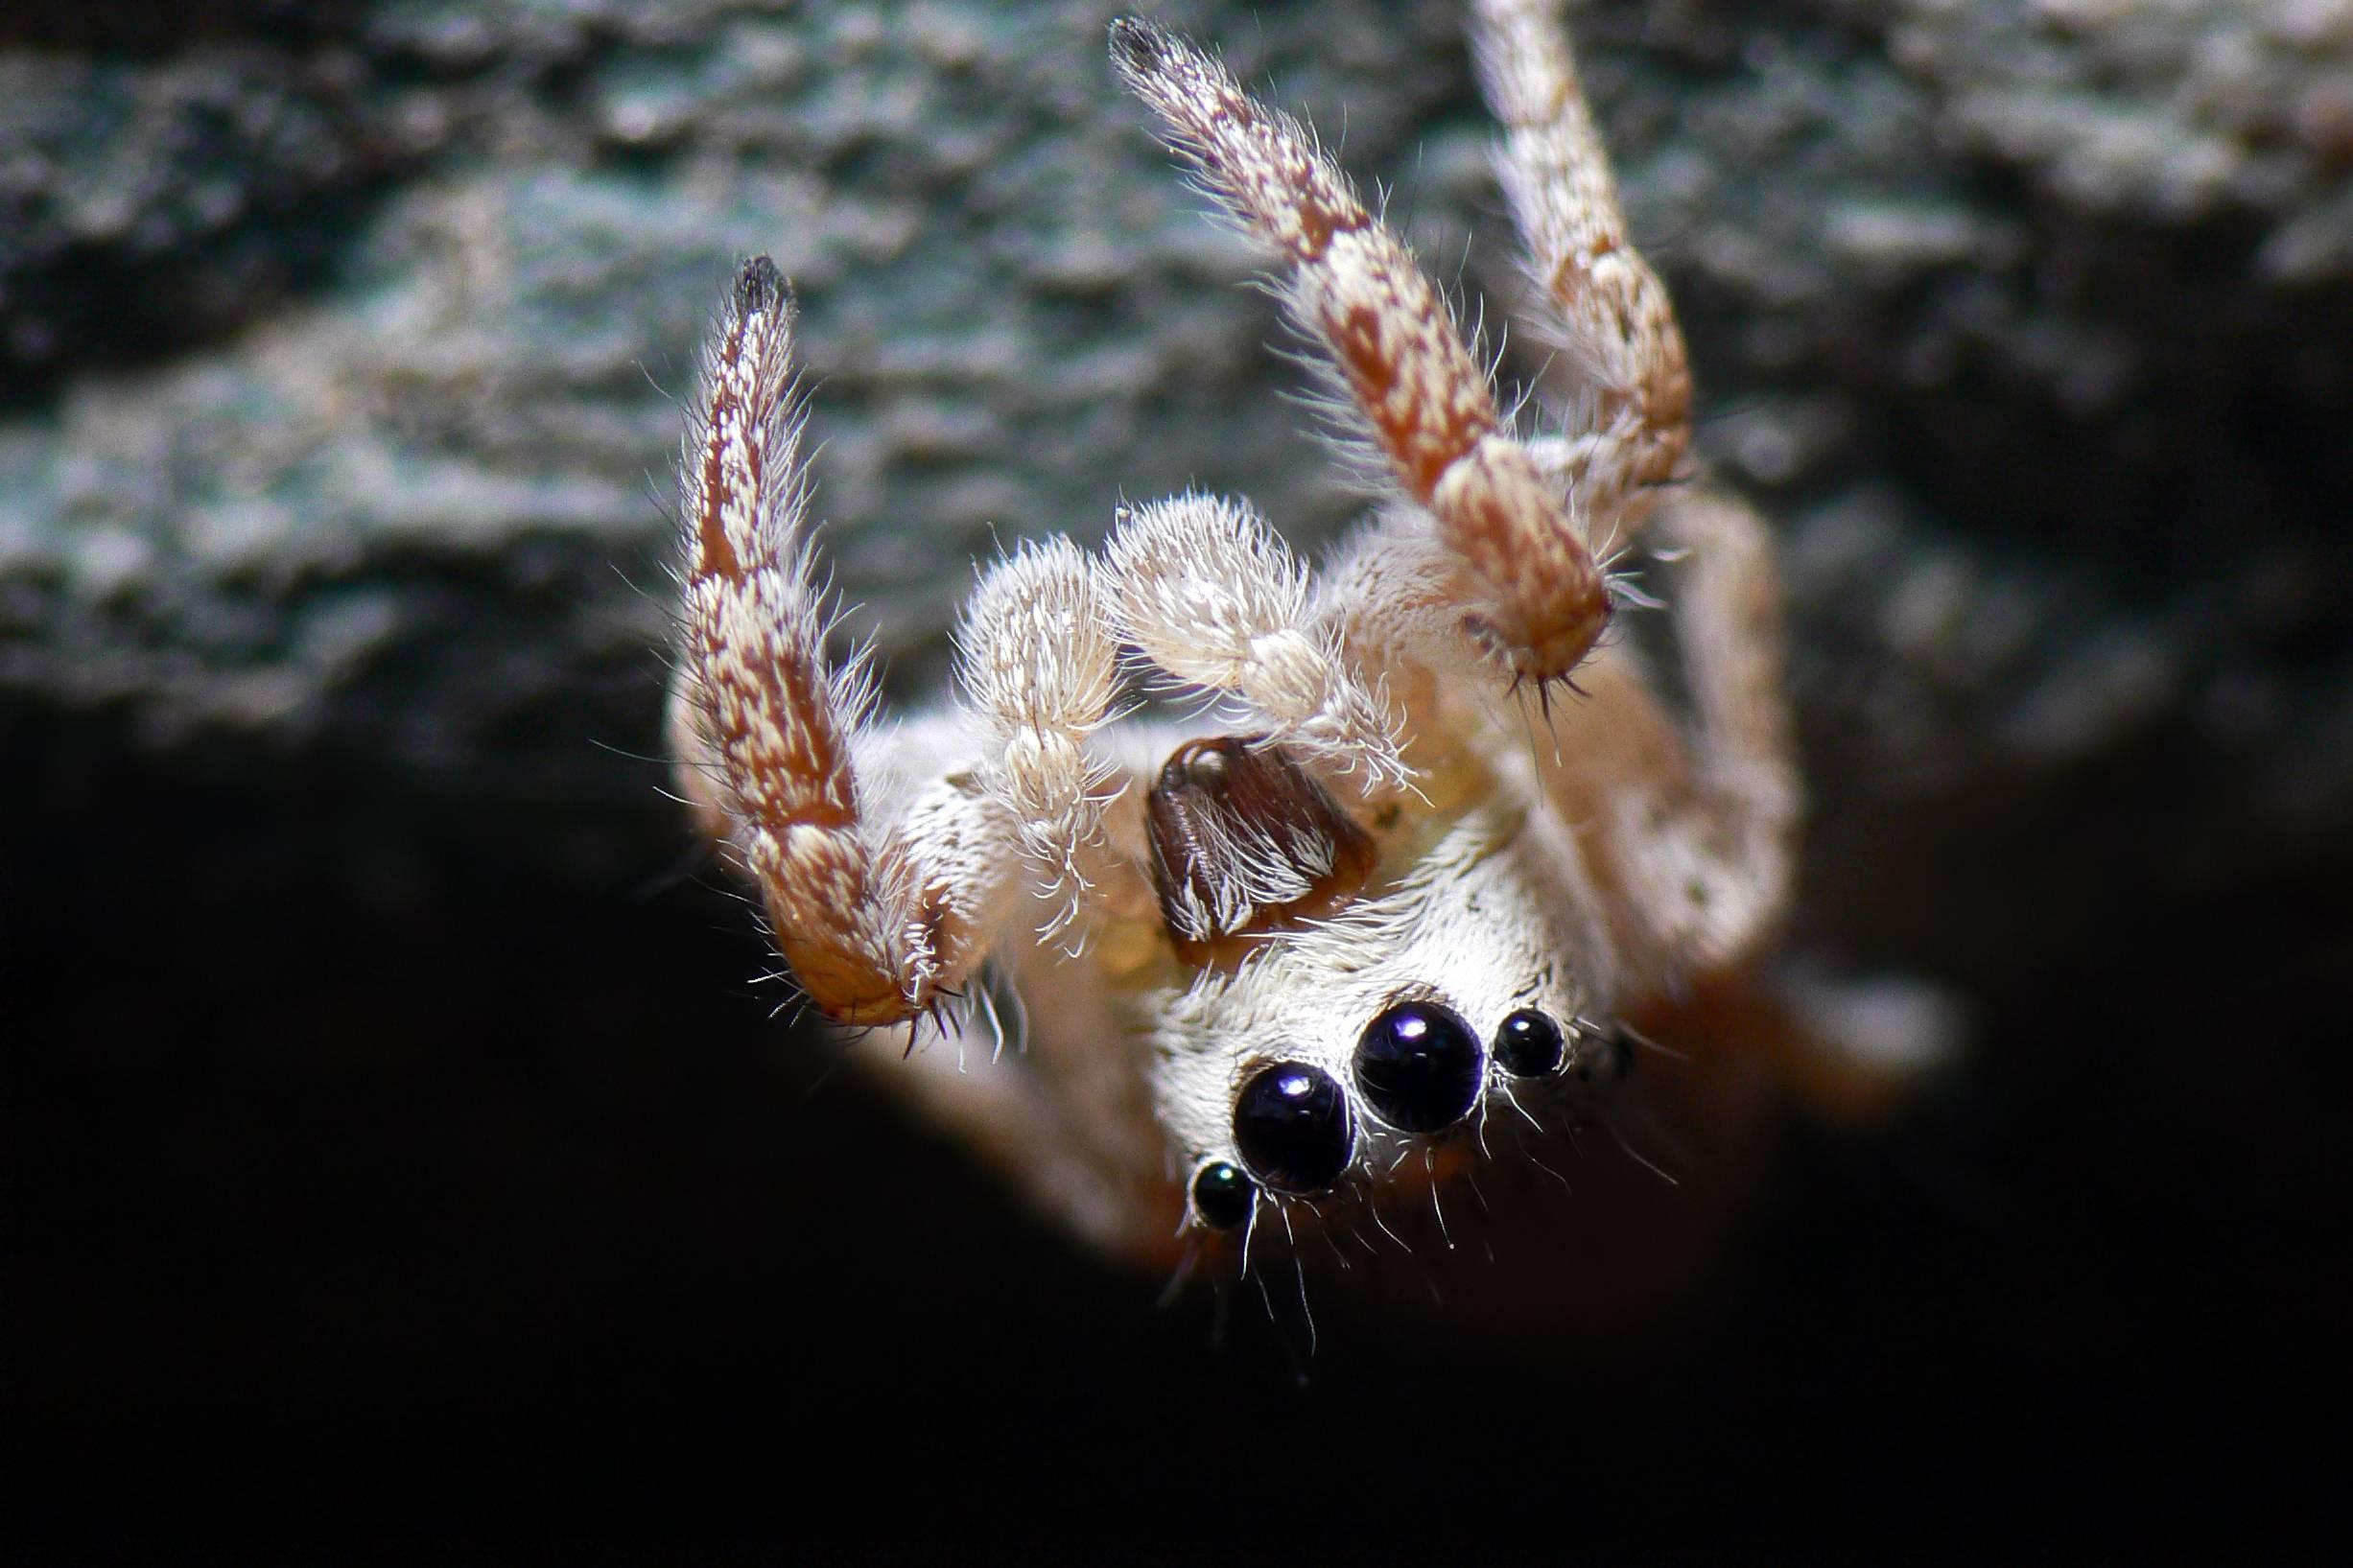 Spider Download Hd Wallpapers, Spider, Animal